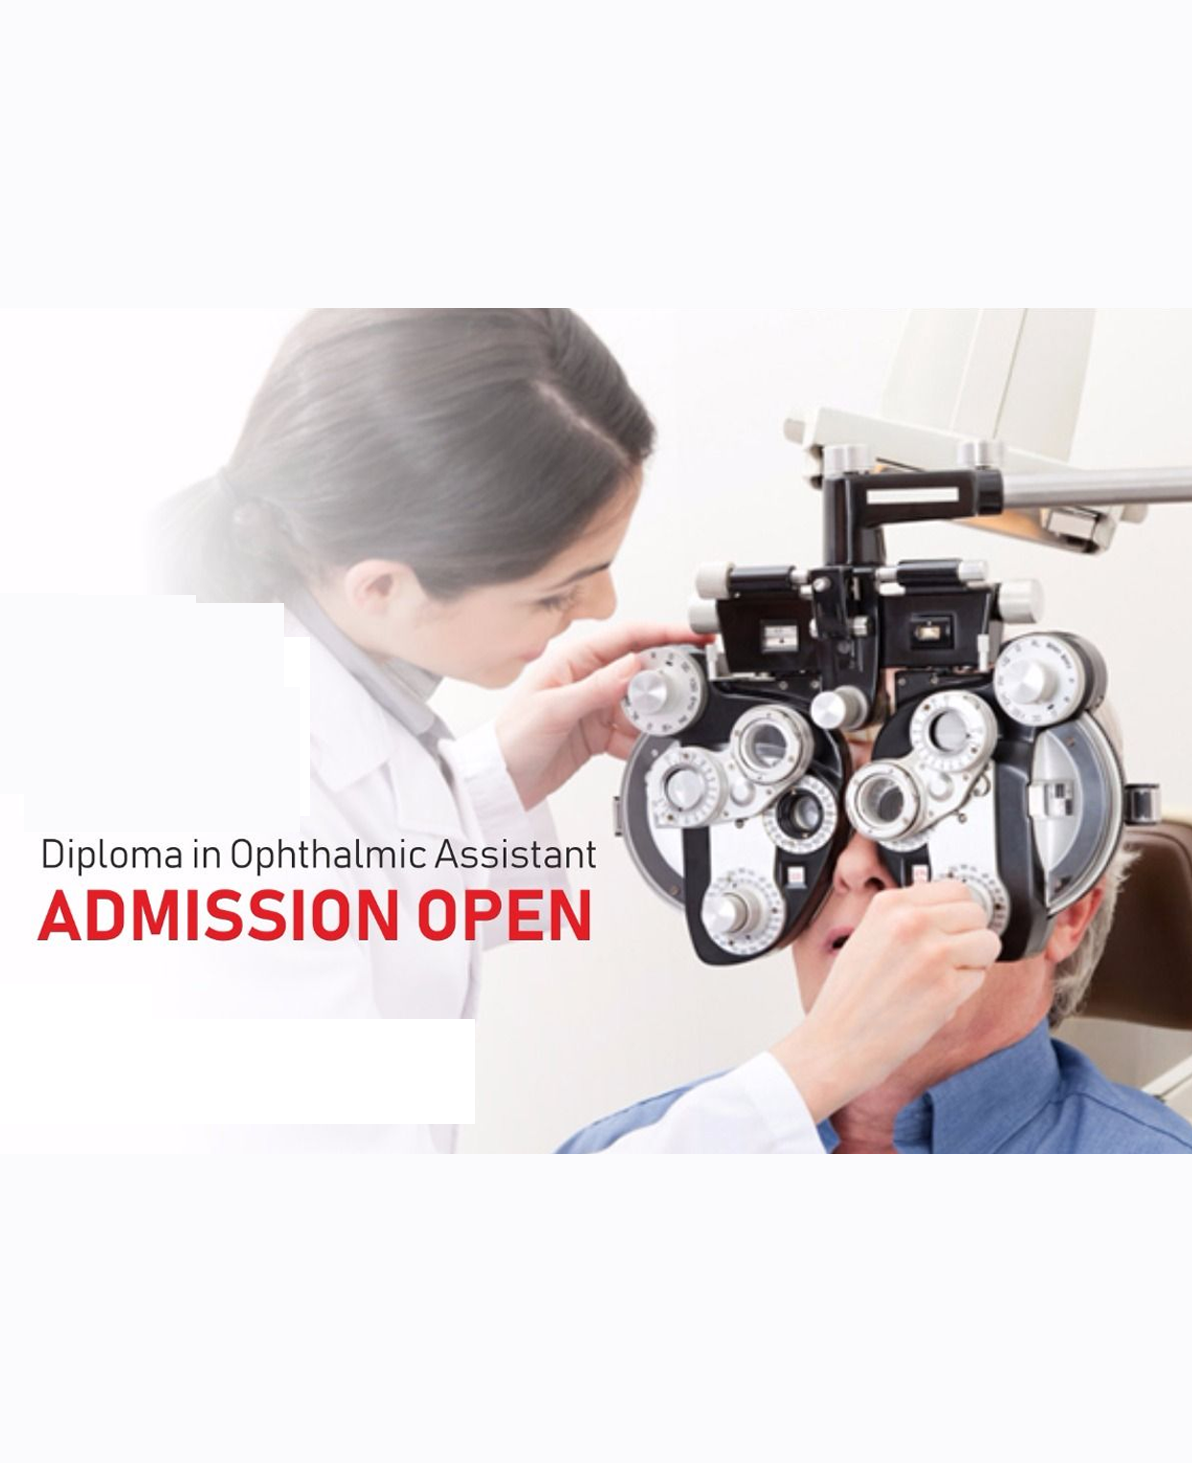 Diploma in Ophthalmic Assistant